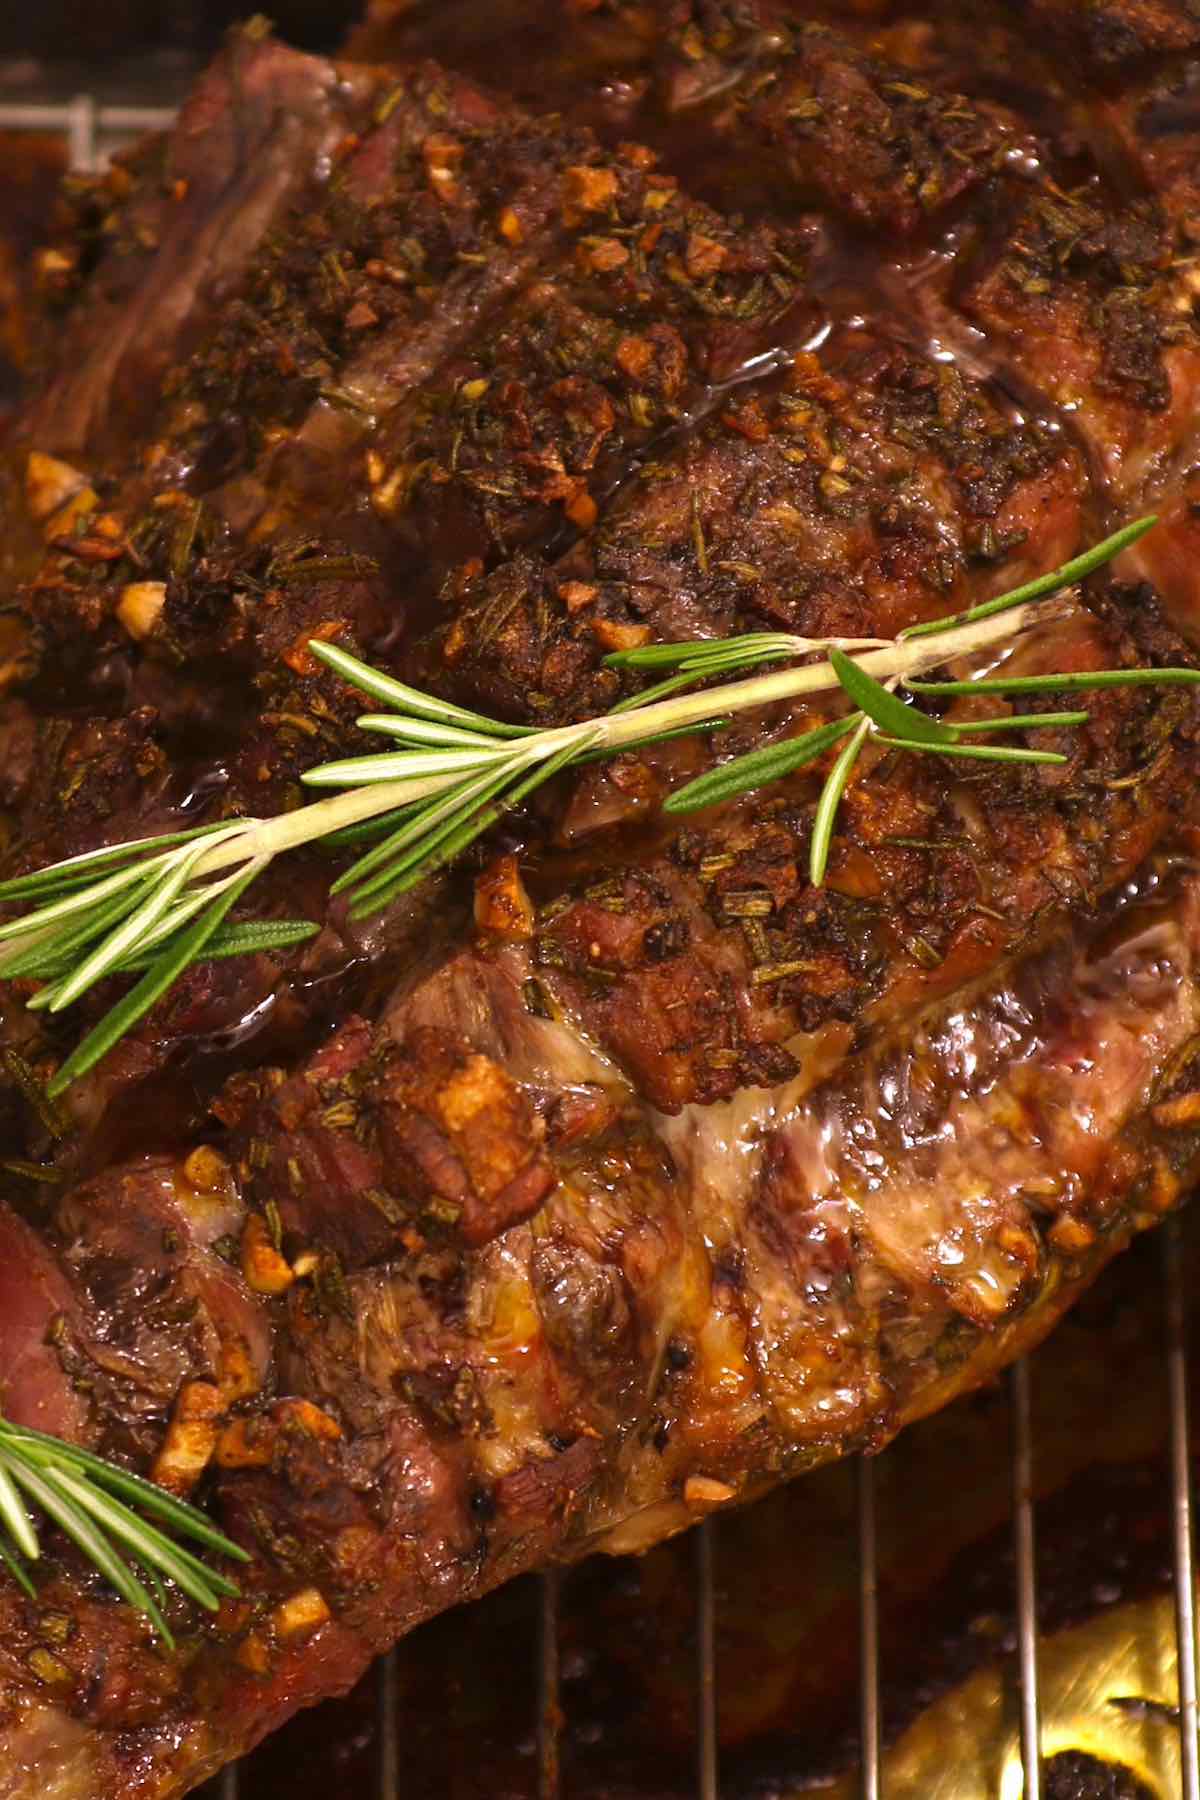 This juicy and EASY Roasted Leg of Lamb recipe features an herb and garlic seasoning on a bone-in or boneless leg of lamb. This no-fail method will give you the perfect and delicious result every time – perfect for special occasions or holiday dinners.